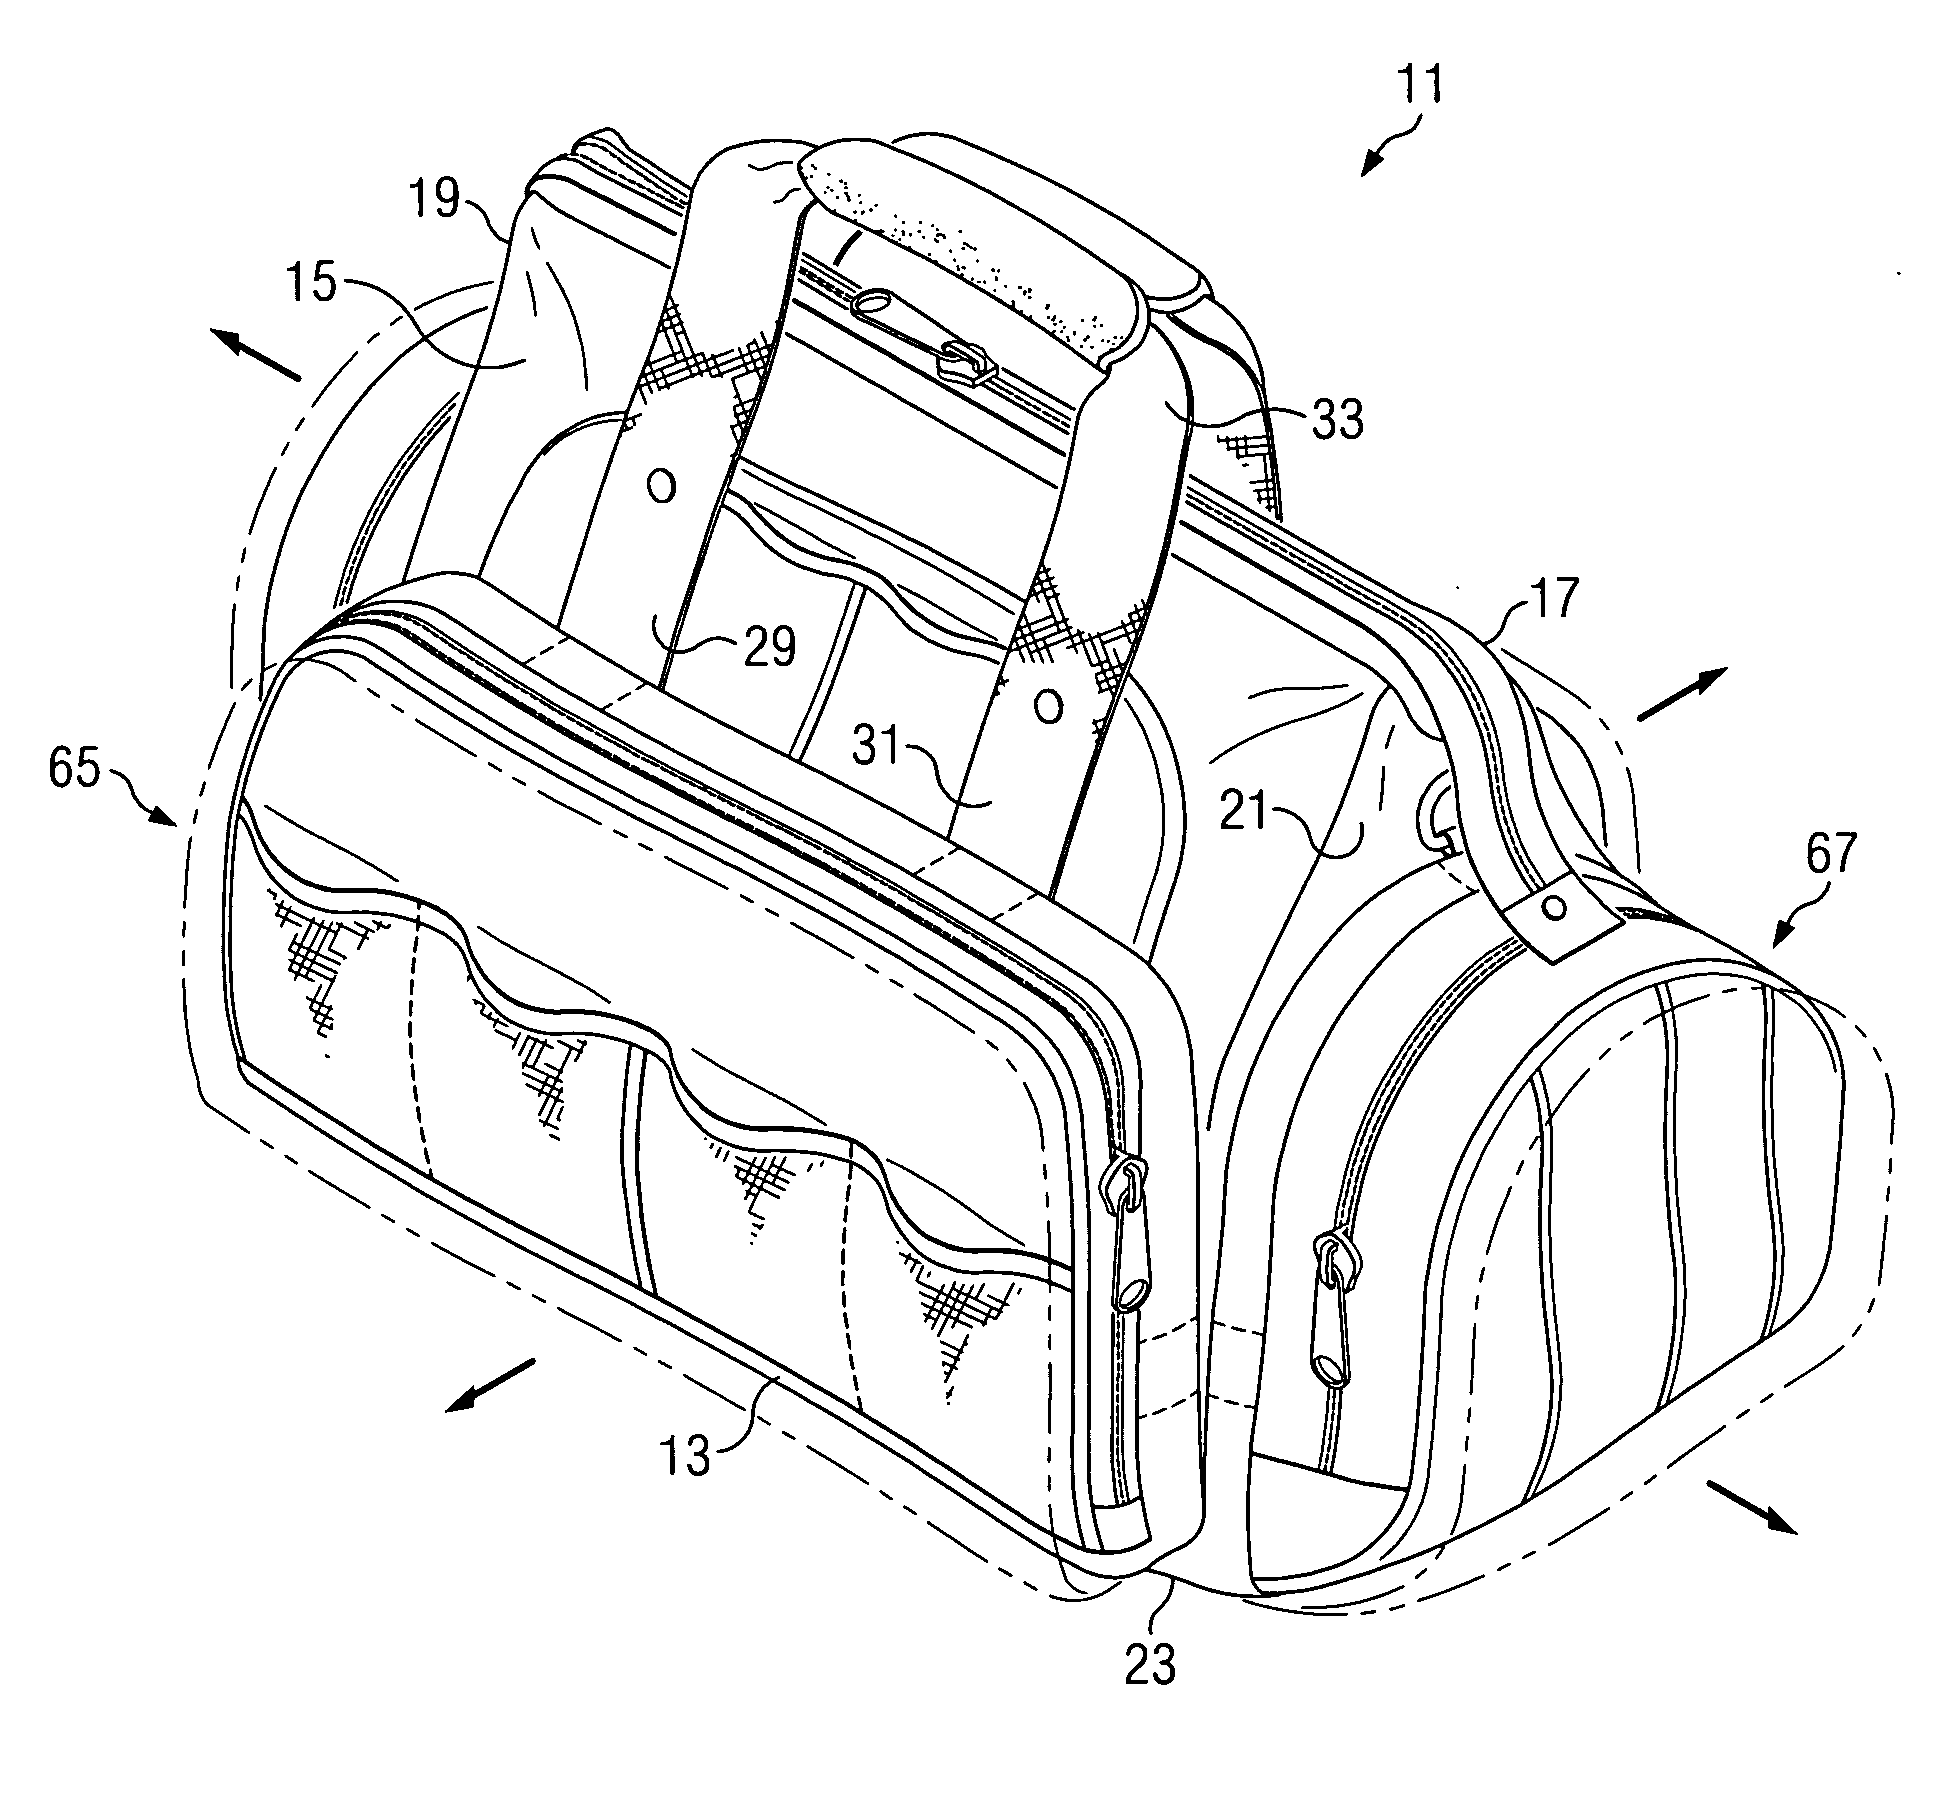 Toolbag with expandible pockets